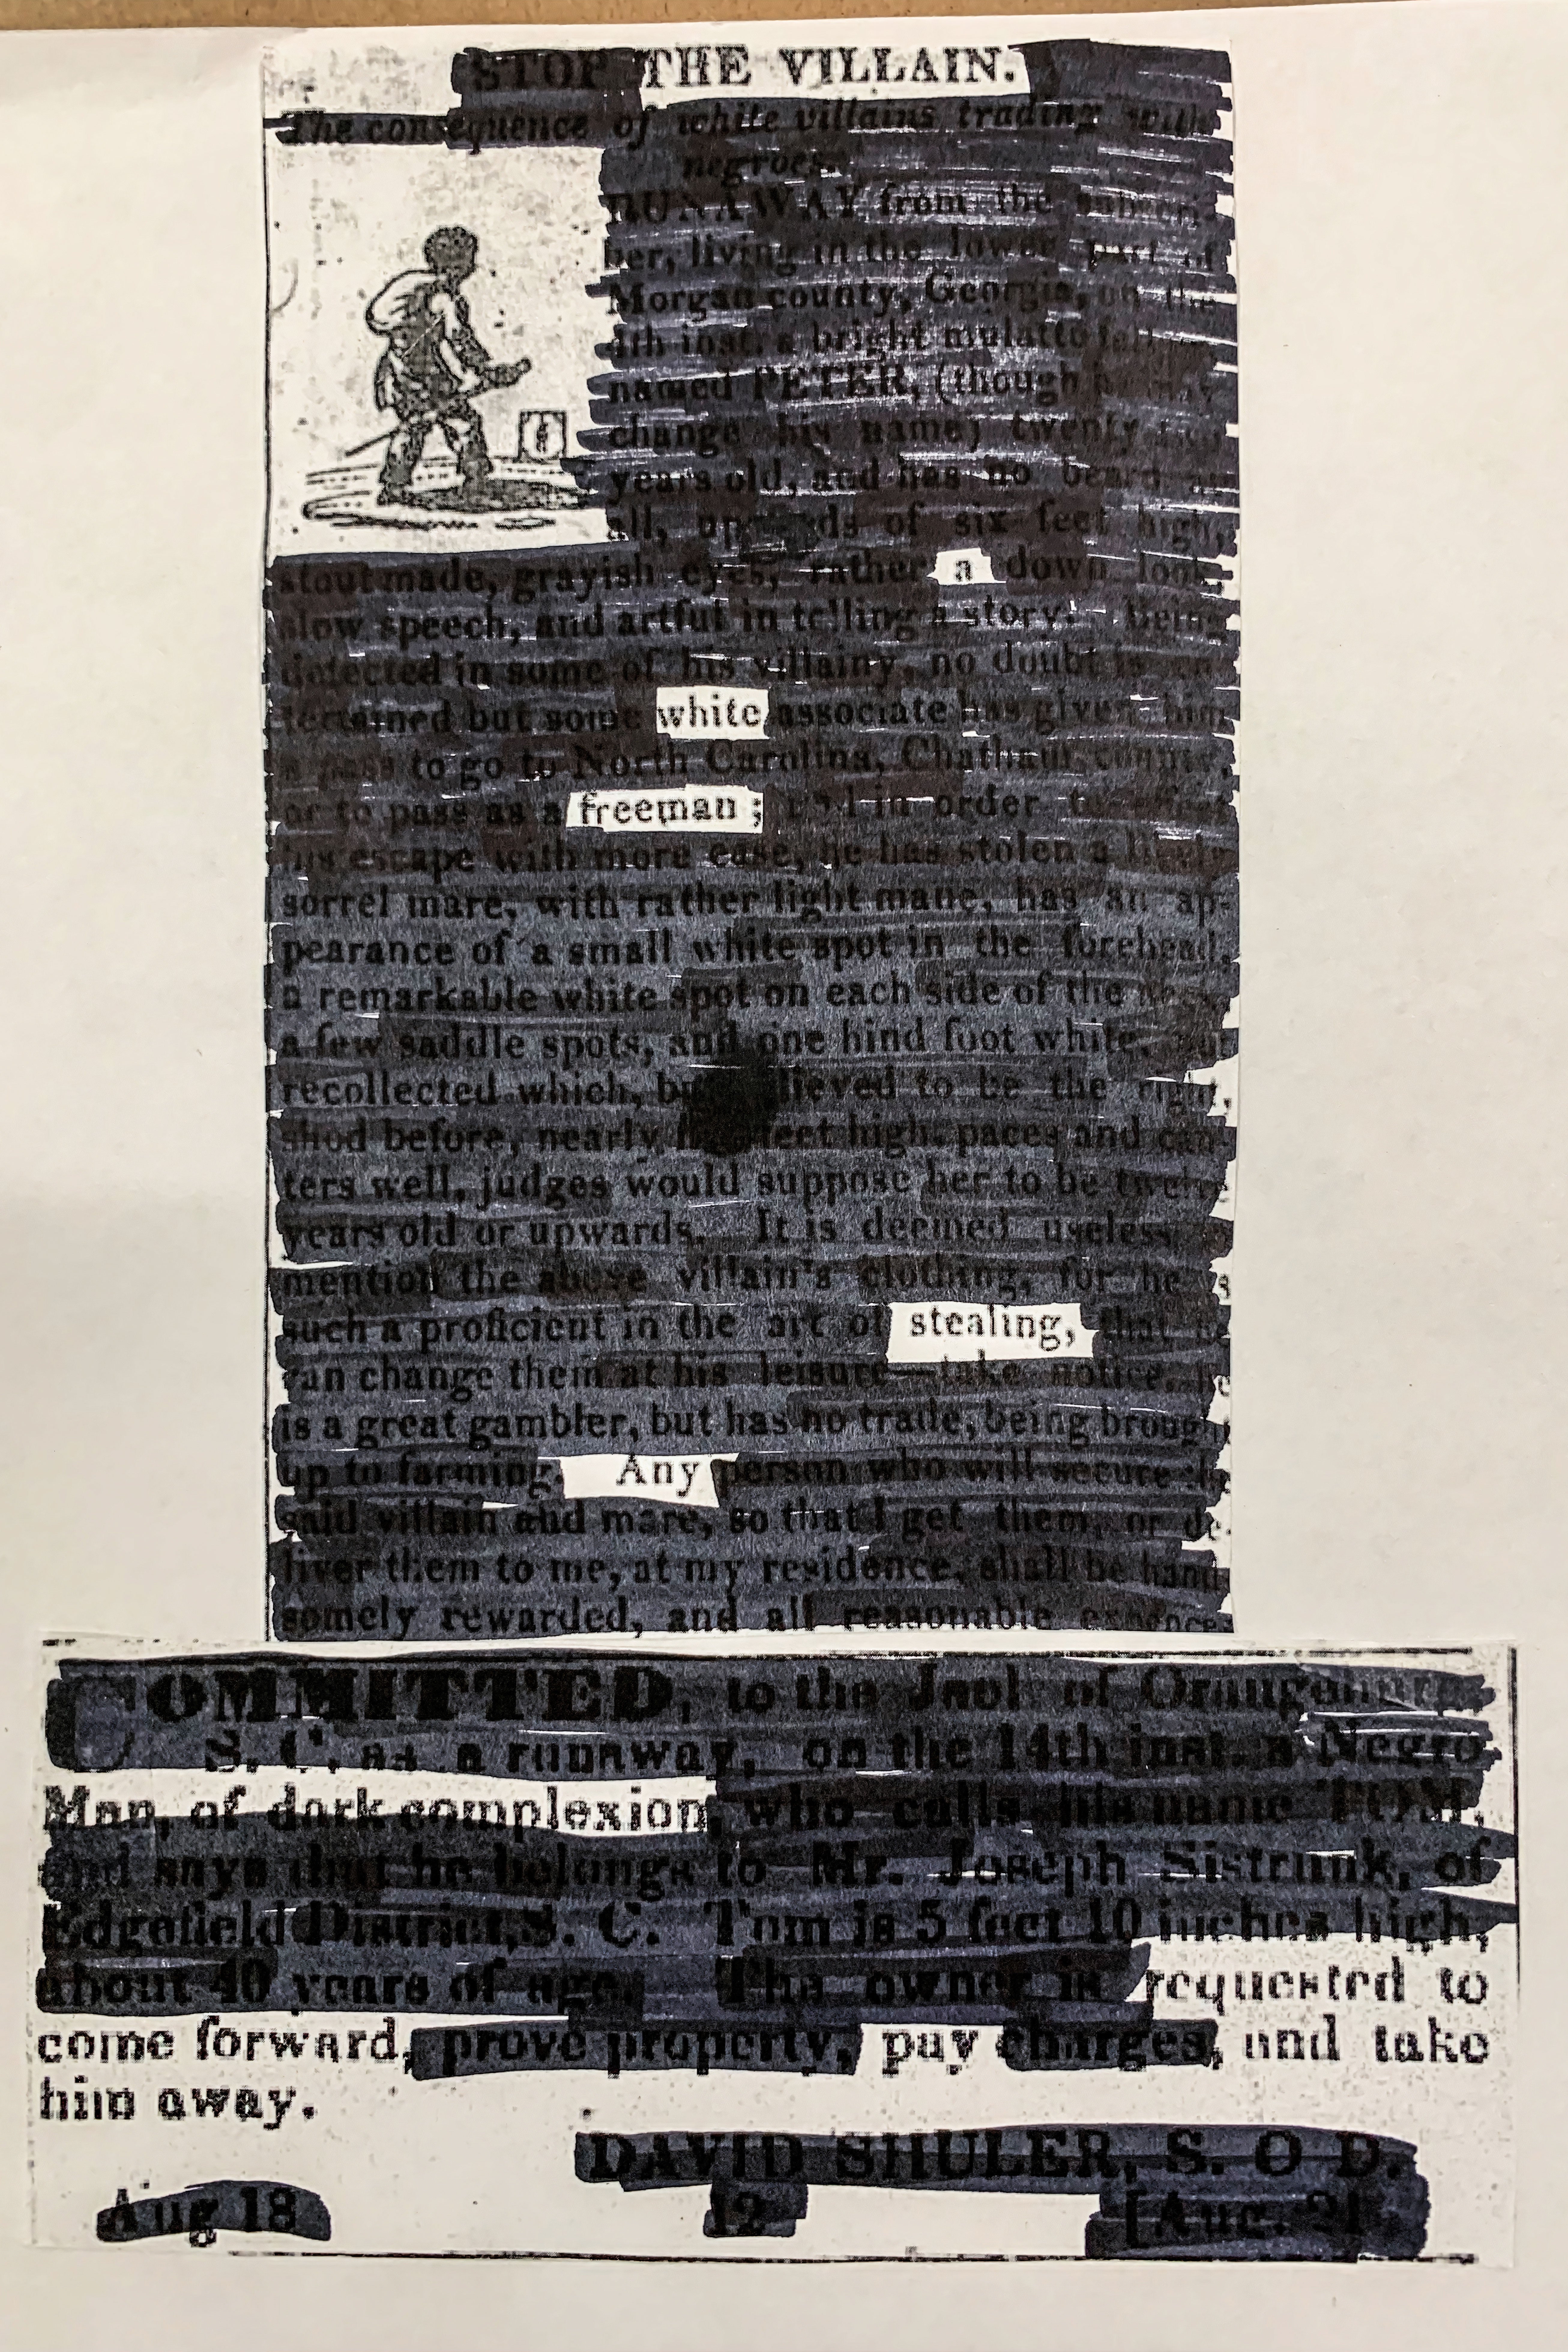 An old newspaper ad with most of the text blacked out with marker to reveal a poem from the remaining text